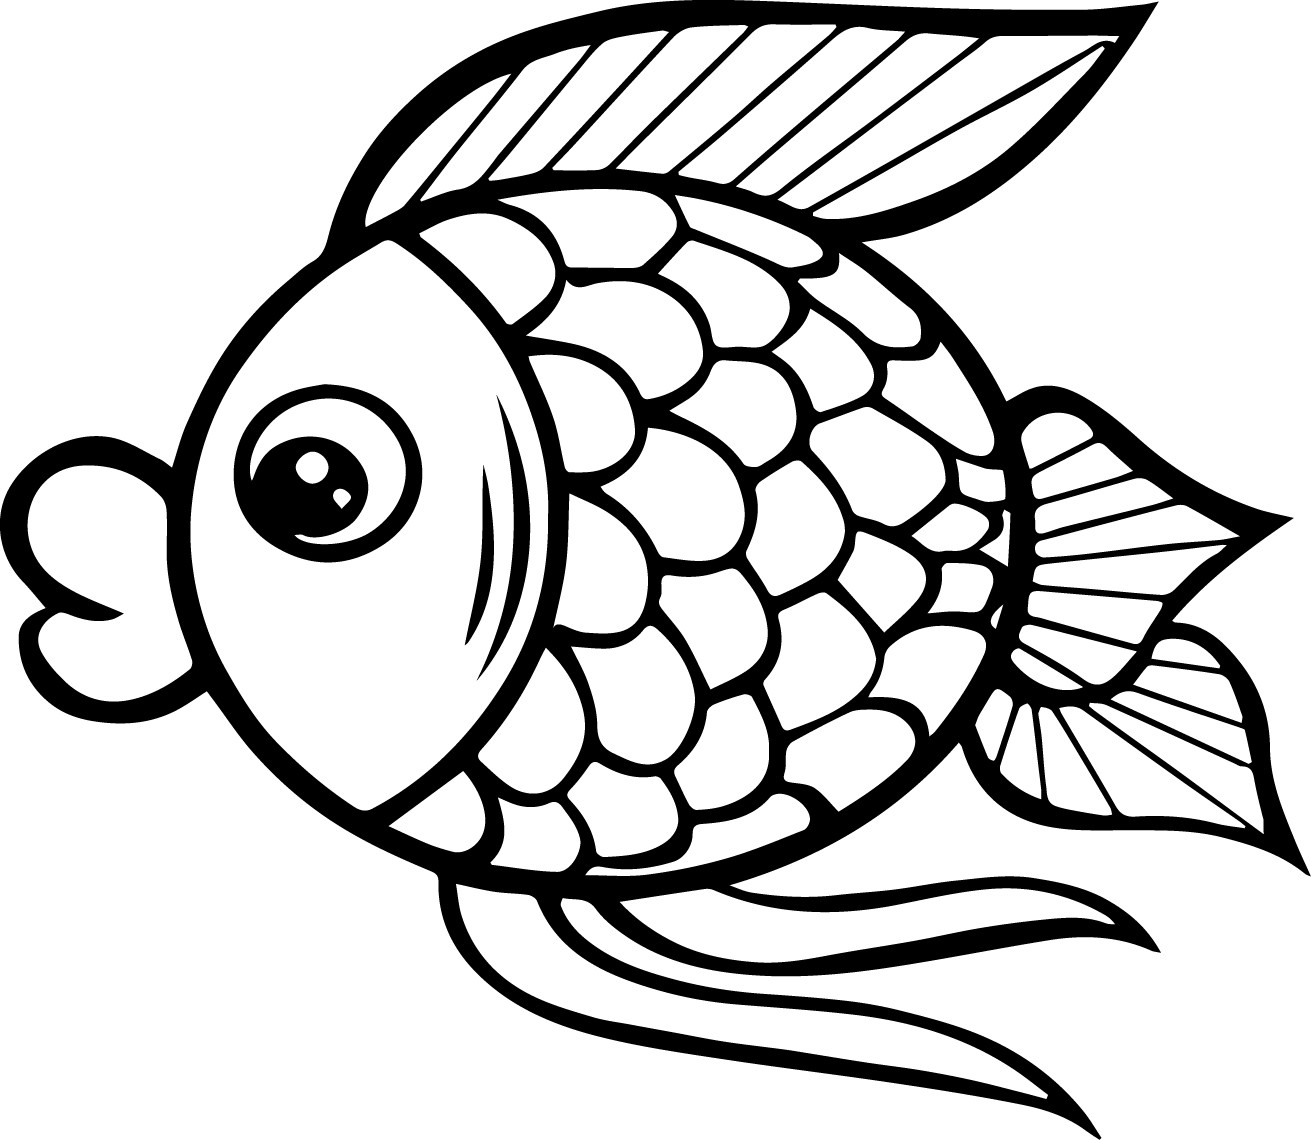 Fish Printable Coloring Pages
 Sampler Fish Colouring Picture Coloring Pages For Kids